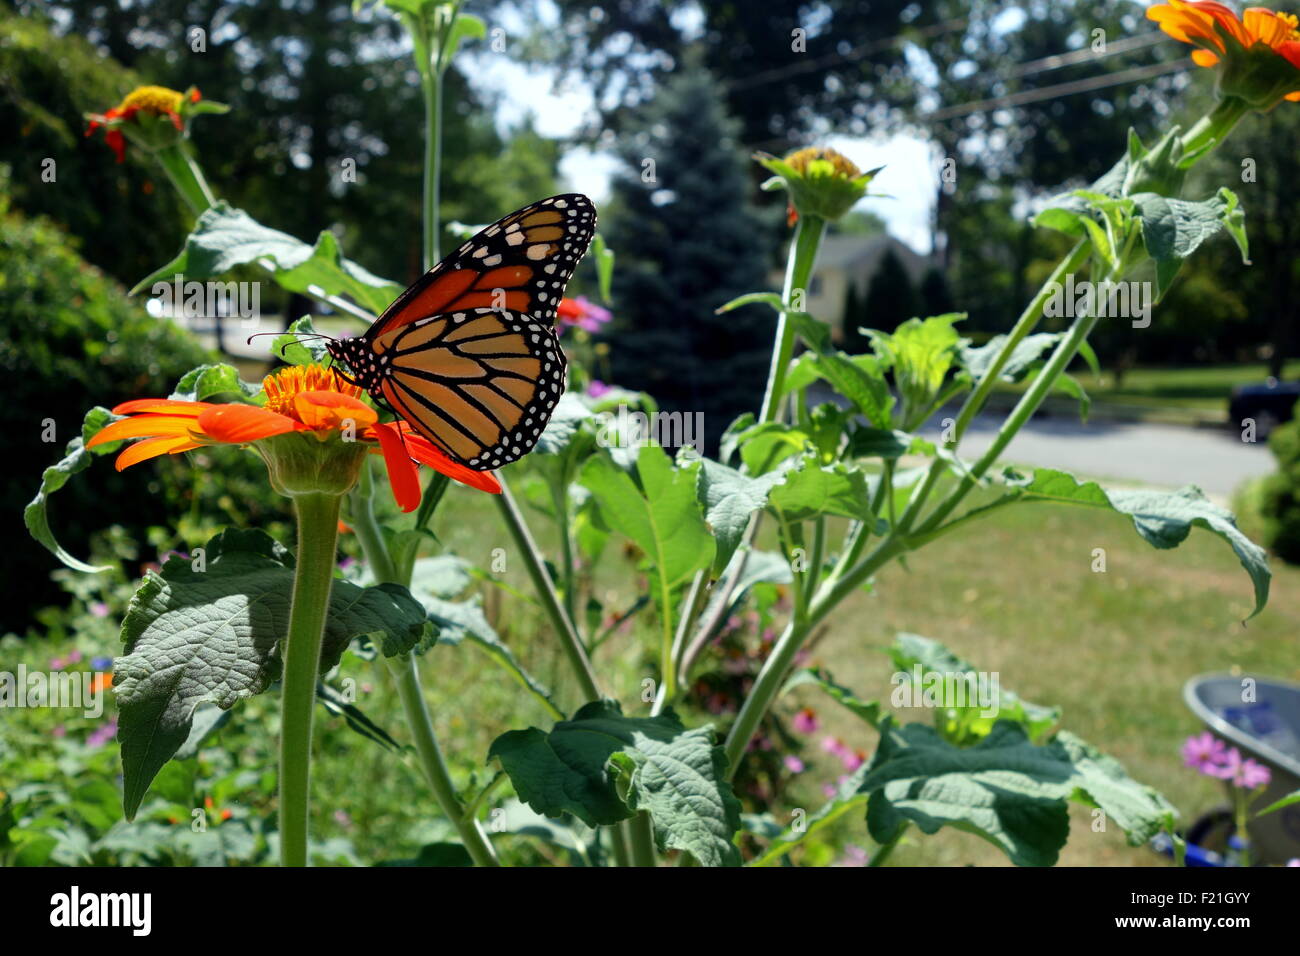 Monarch butterfly on Mexican Sunflower in home garden Stock Photo